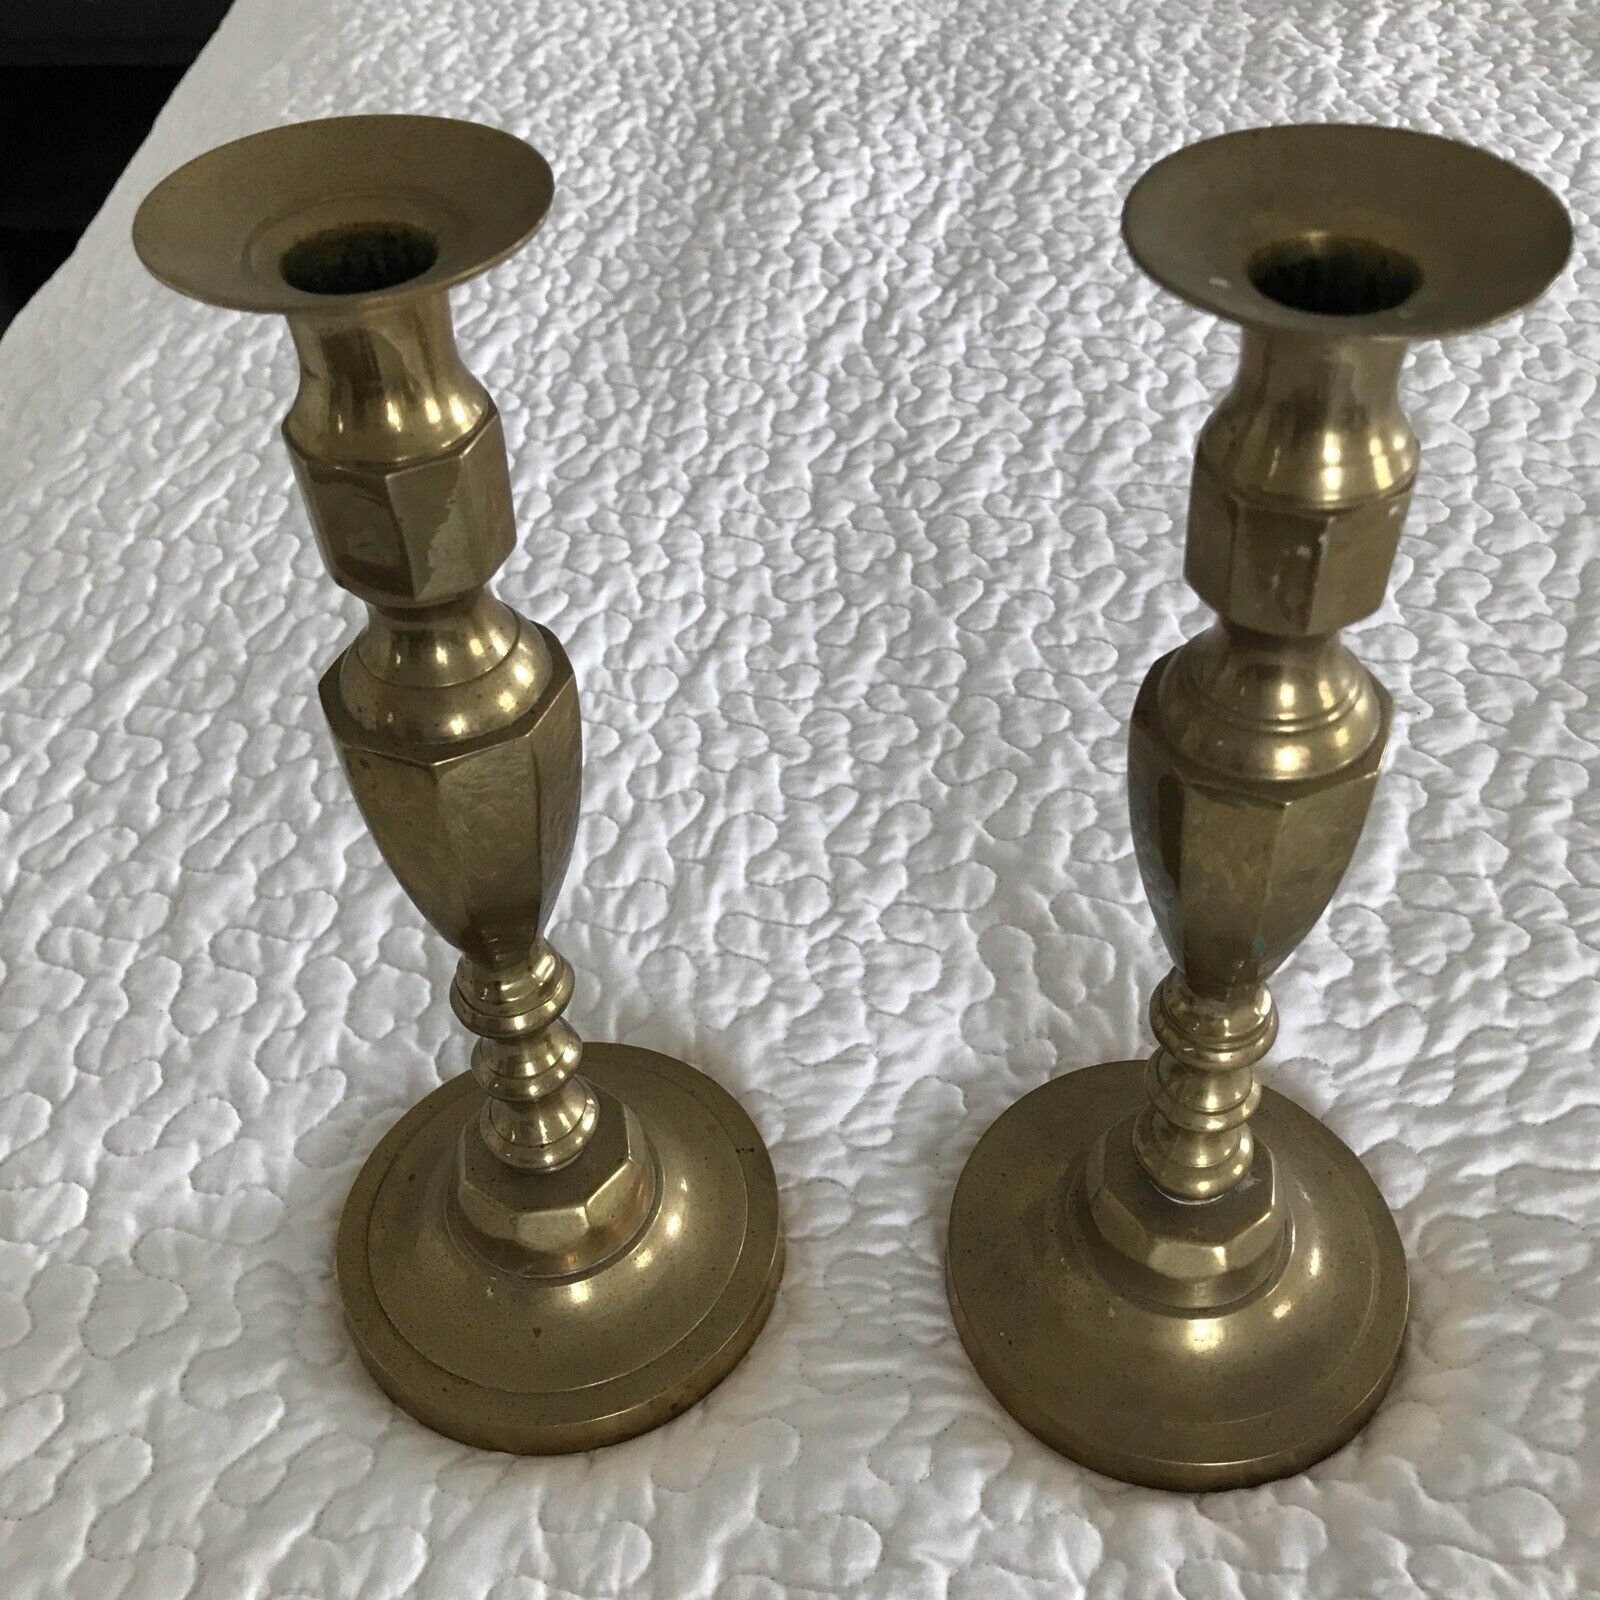 Heavy Brass Candlesticks 11” Tall 1.5 Lbs Each Dining Table Sideboard VIntage